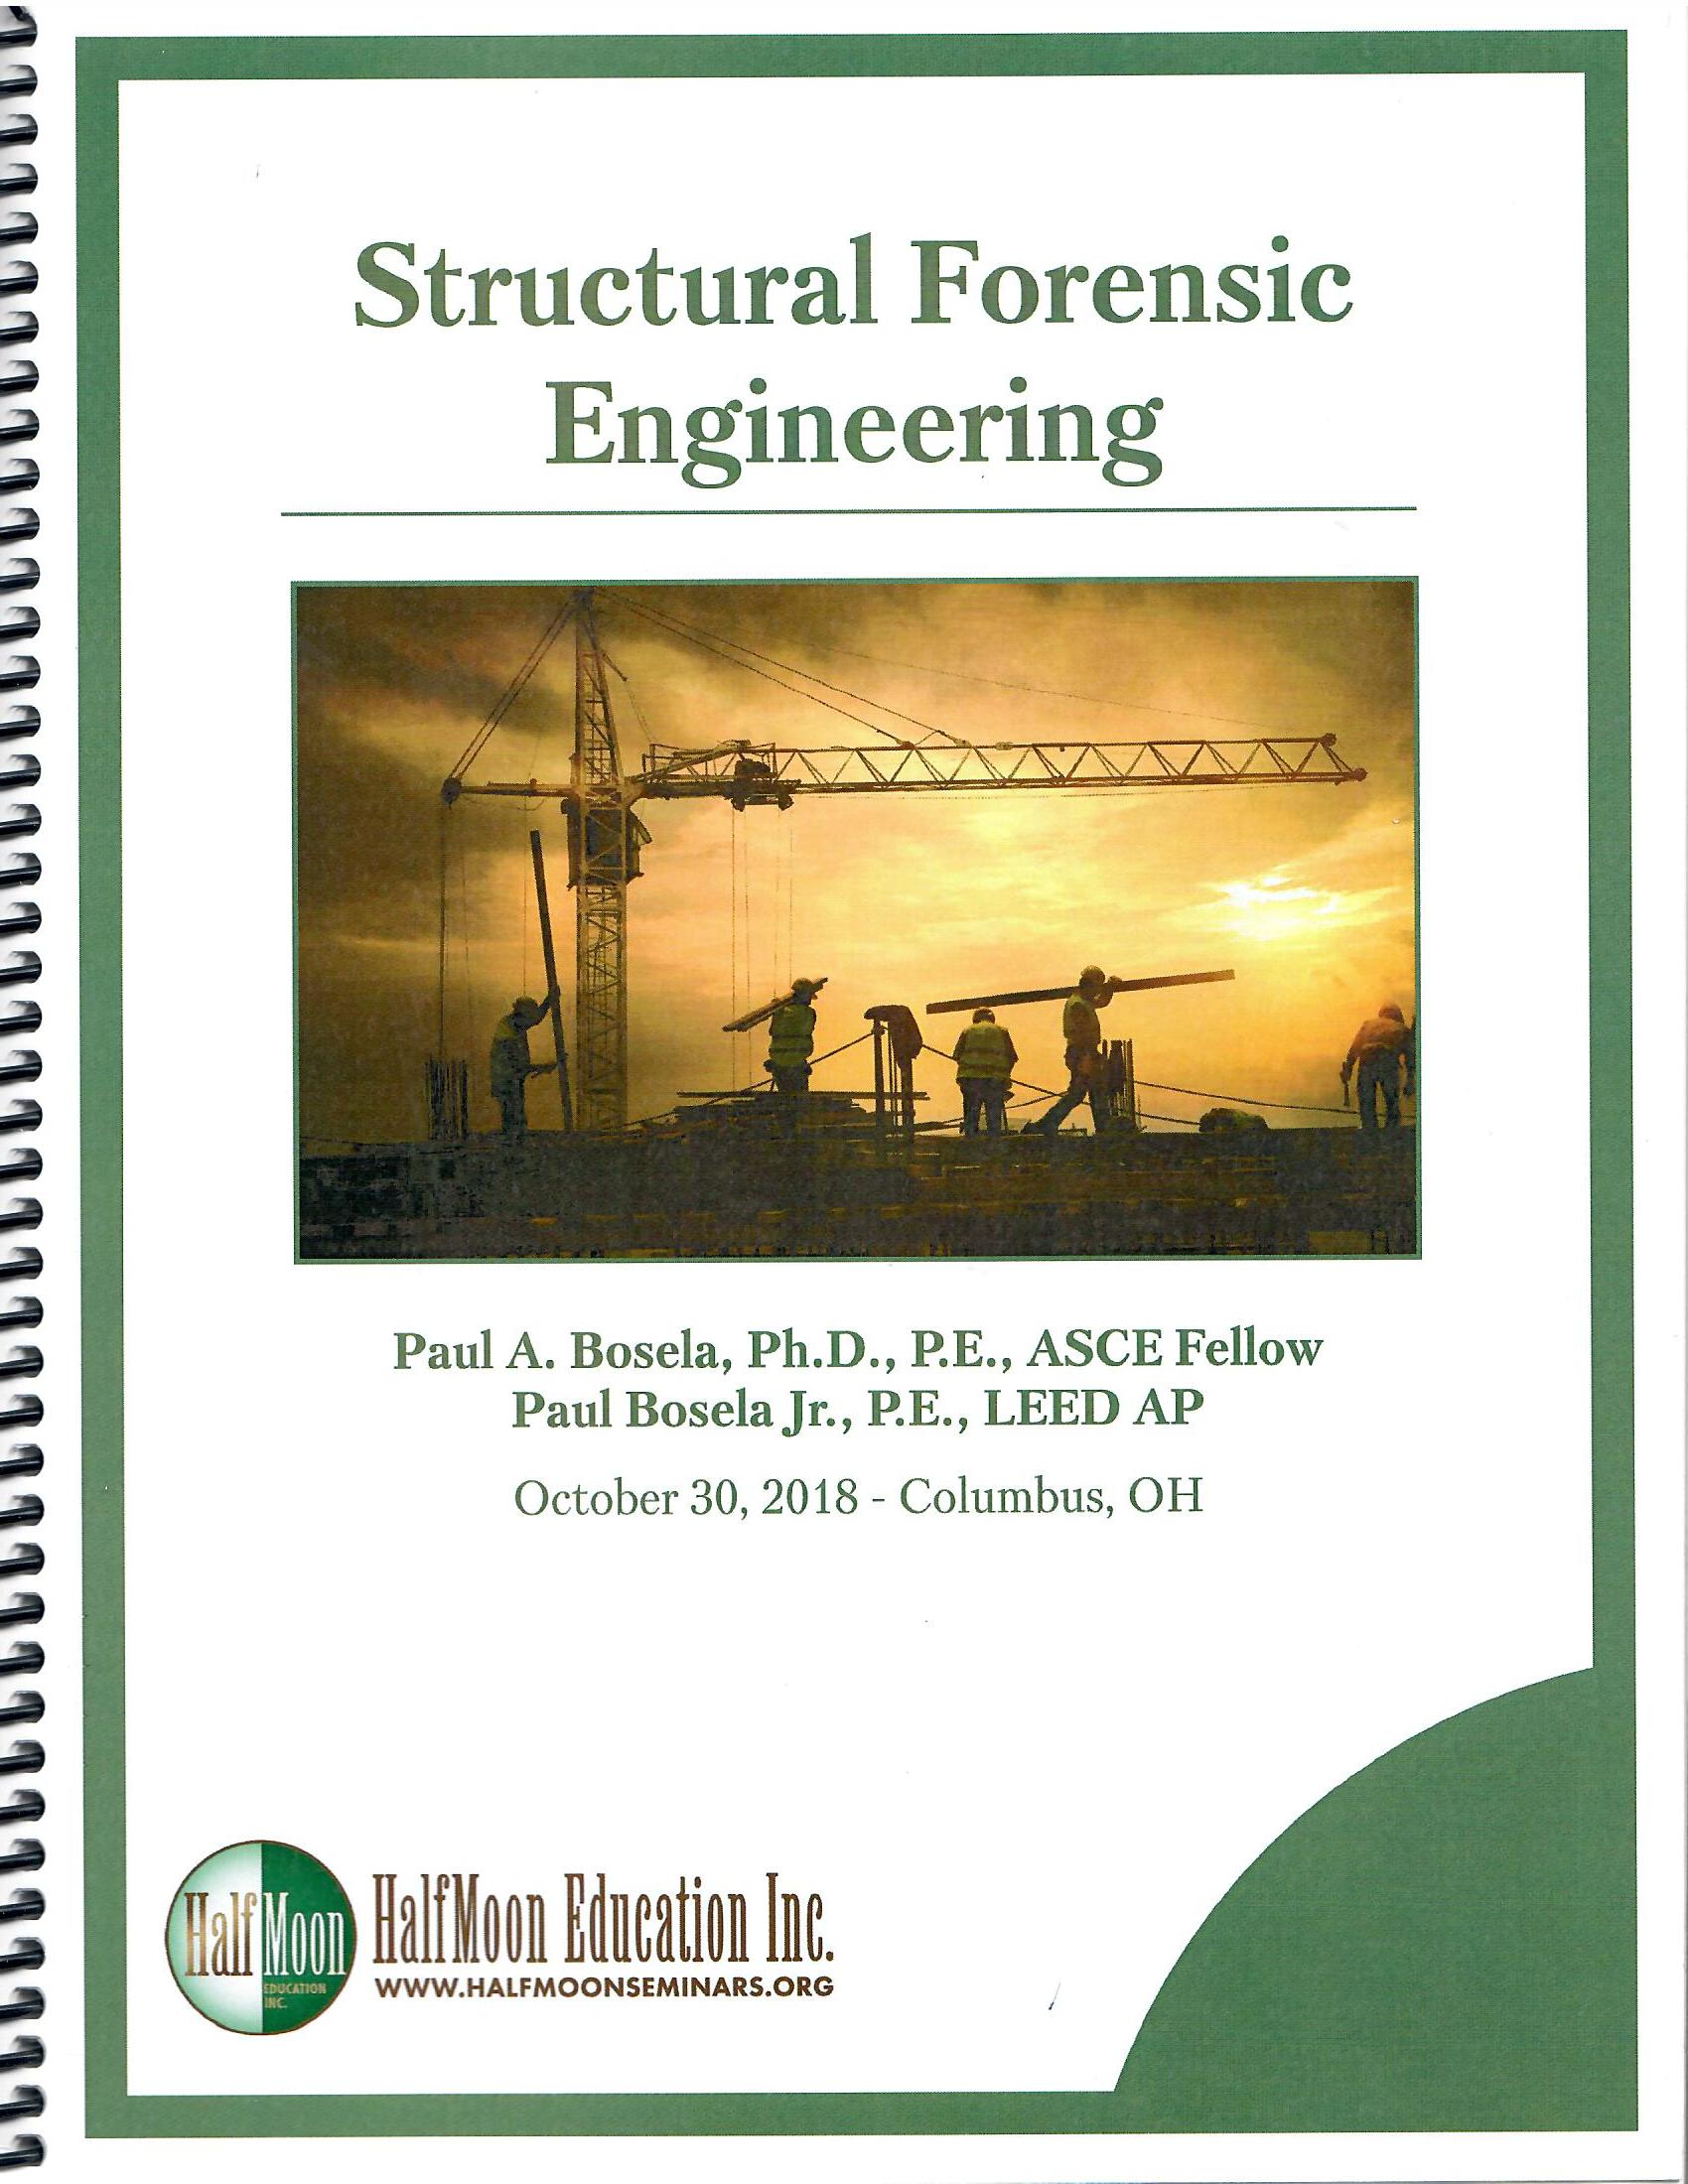 Structural Forensic Engineering Book Cover